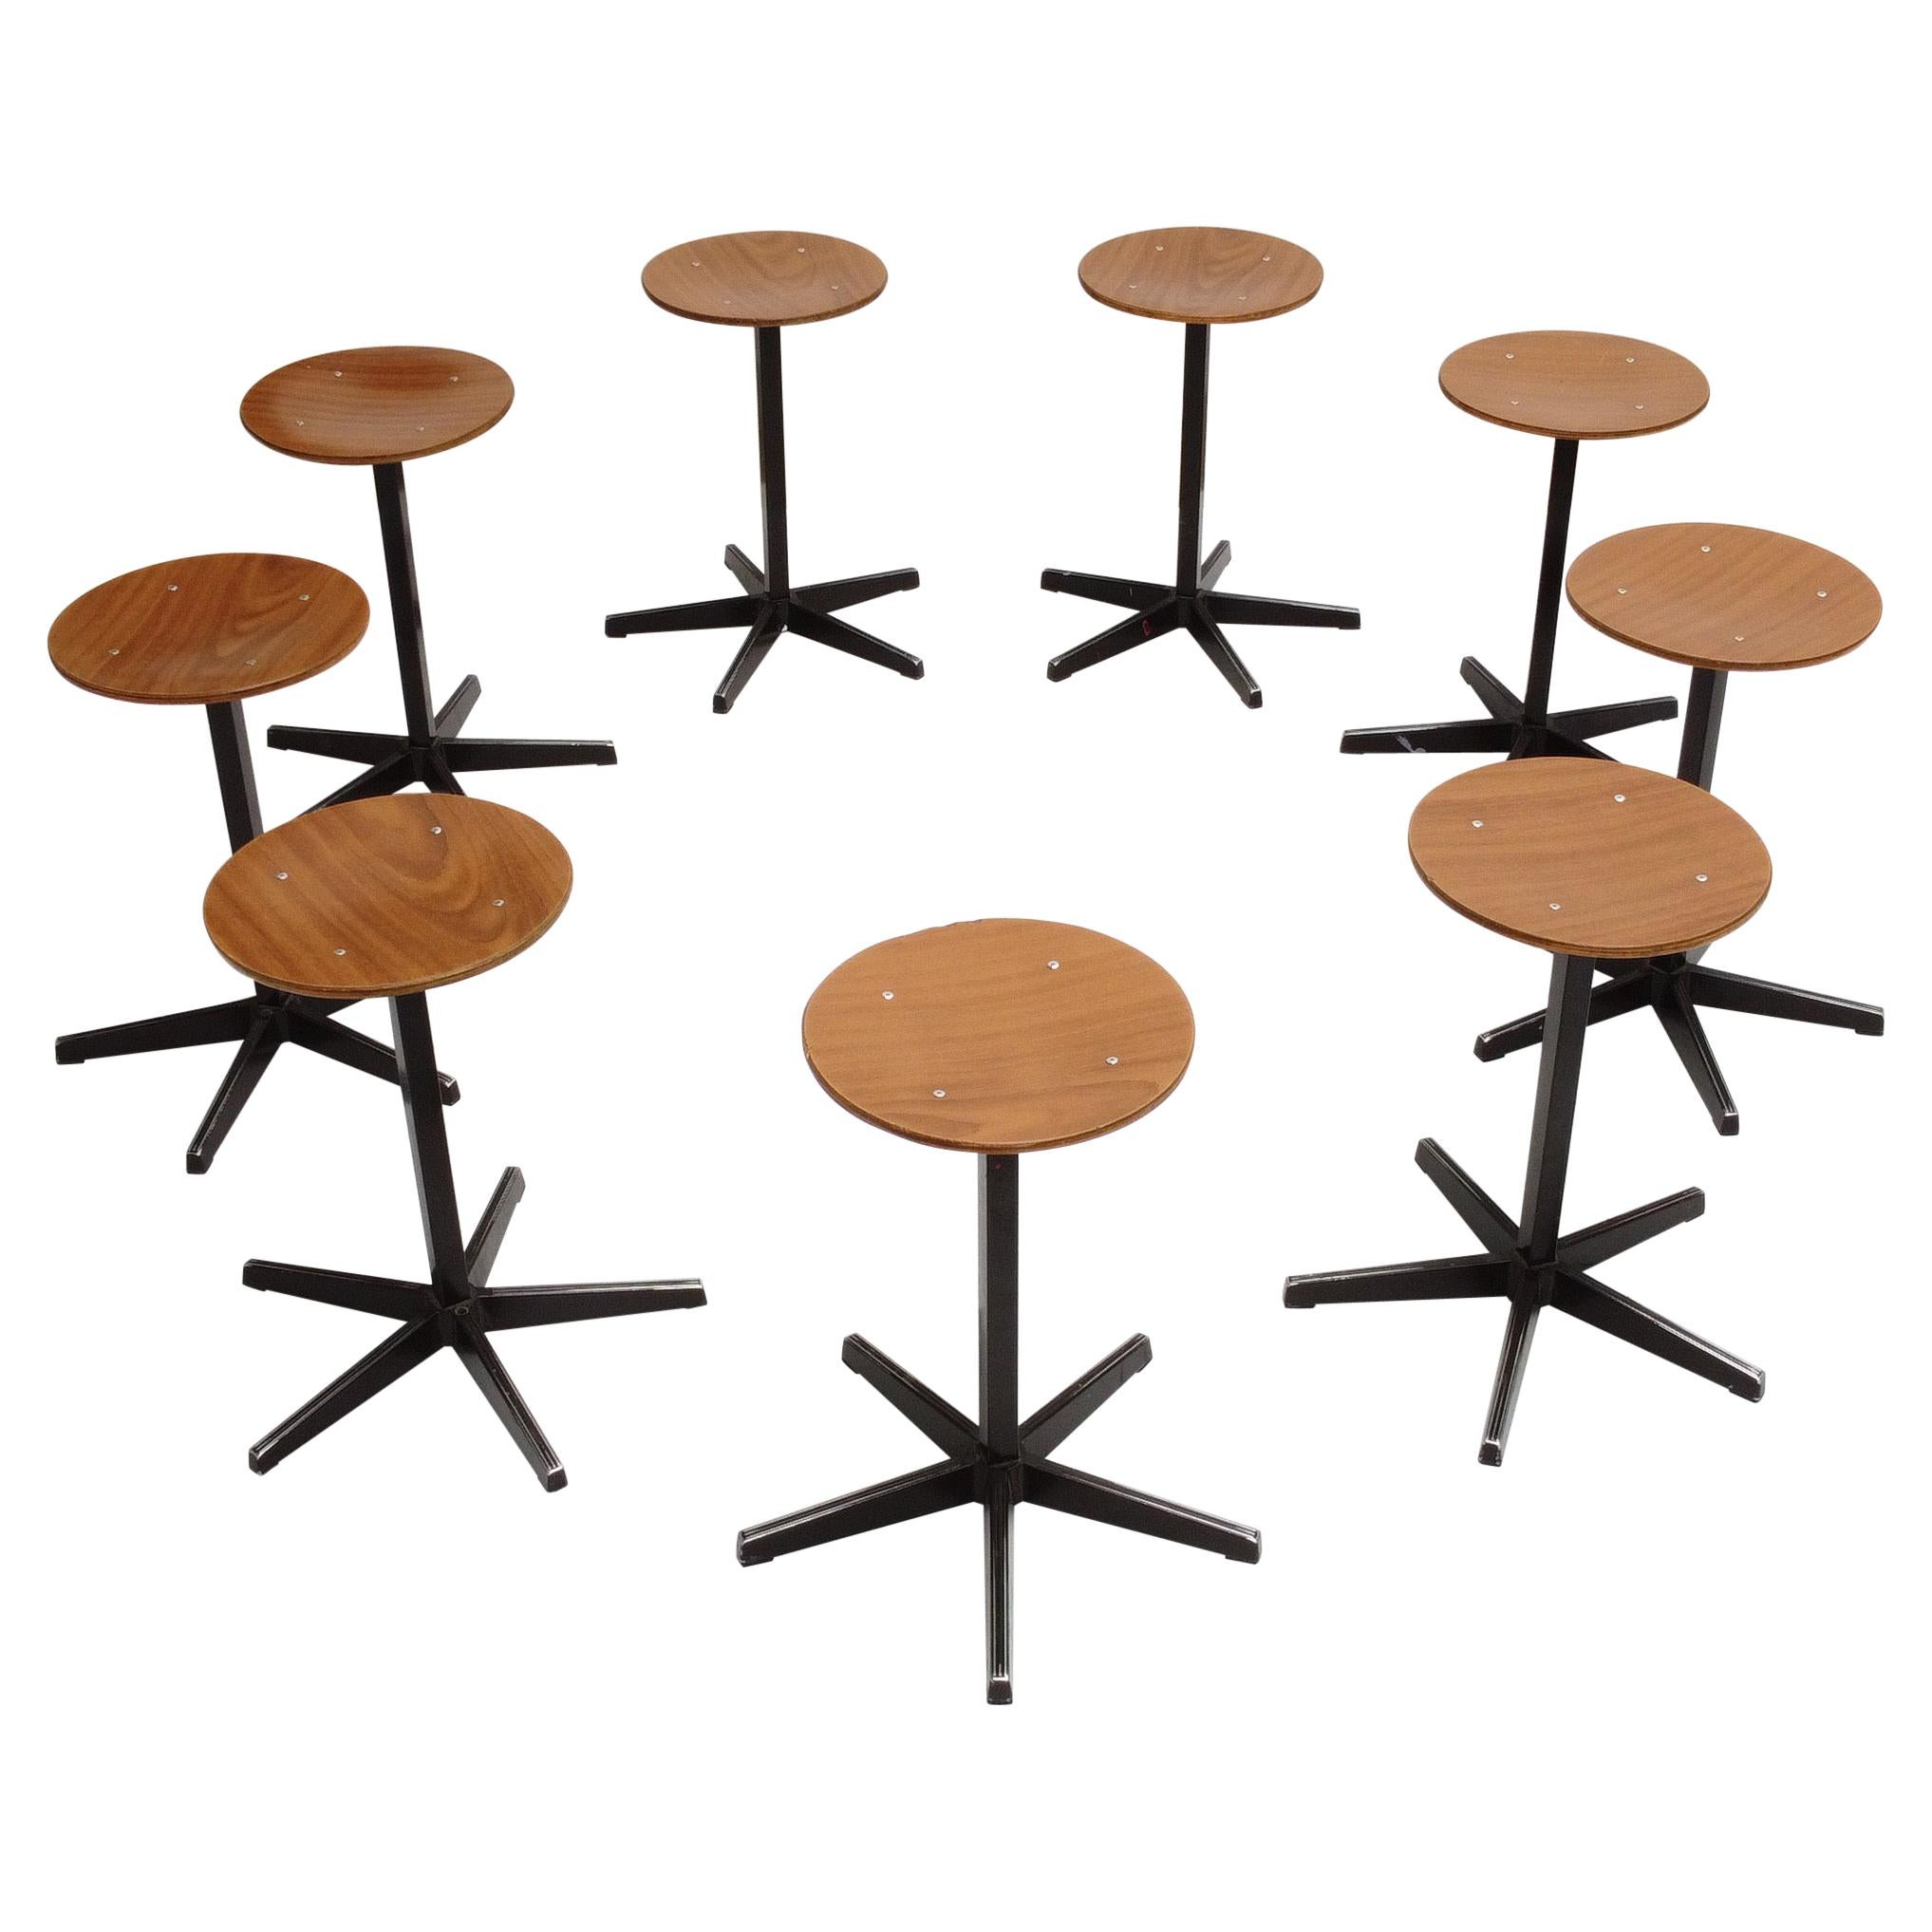 Set of 9 Sturdy Industrial Stools by Dutch Manufacturer Galvanitas, 1970's